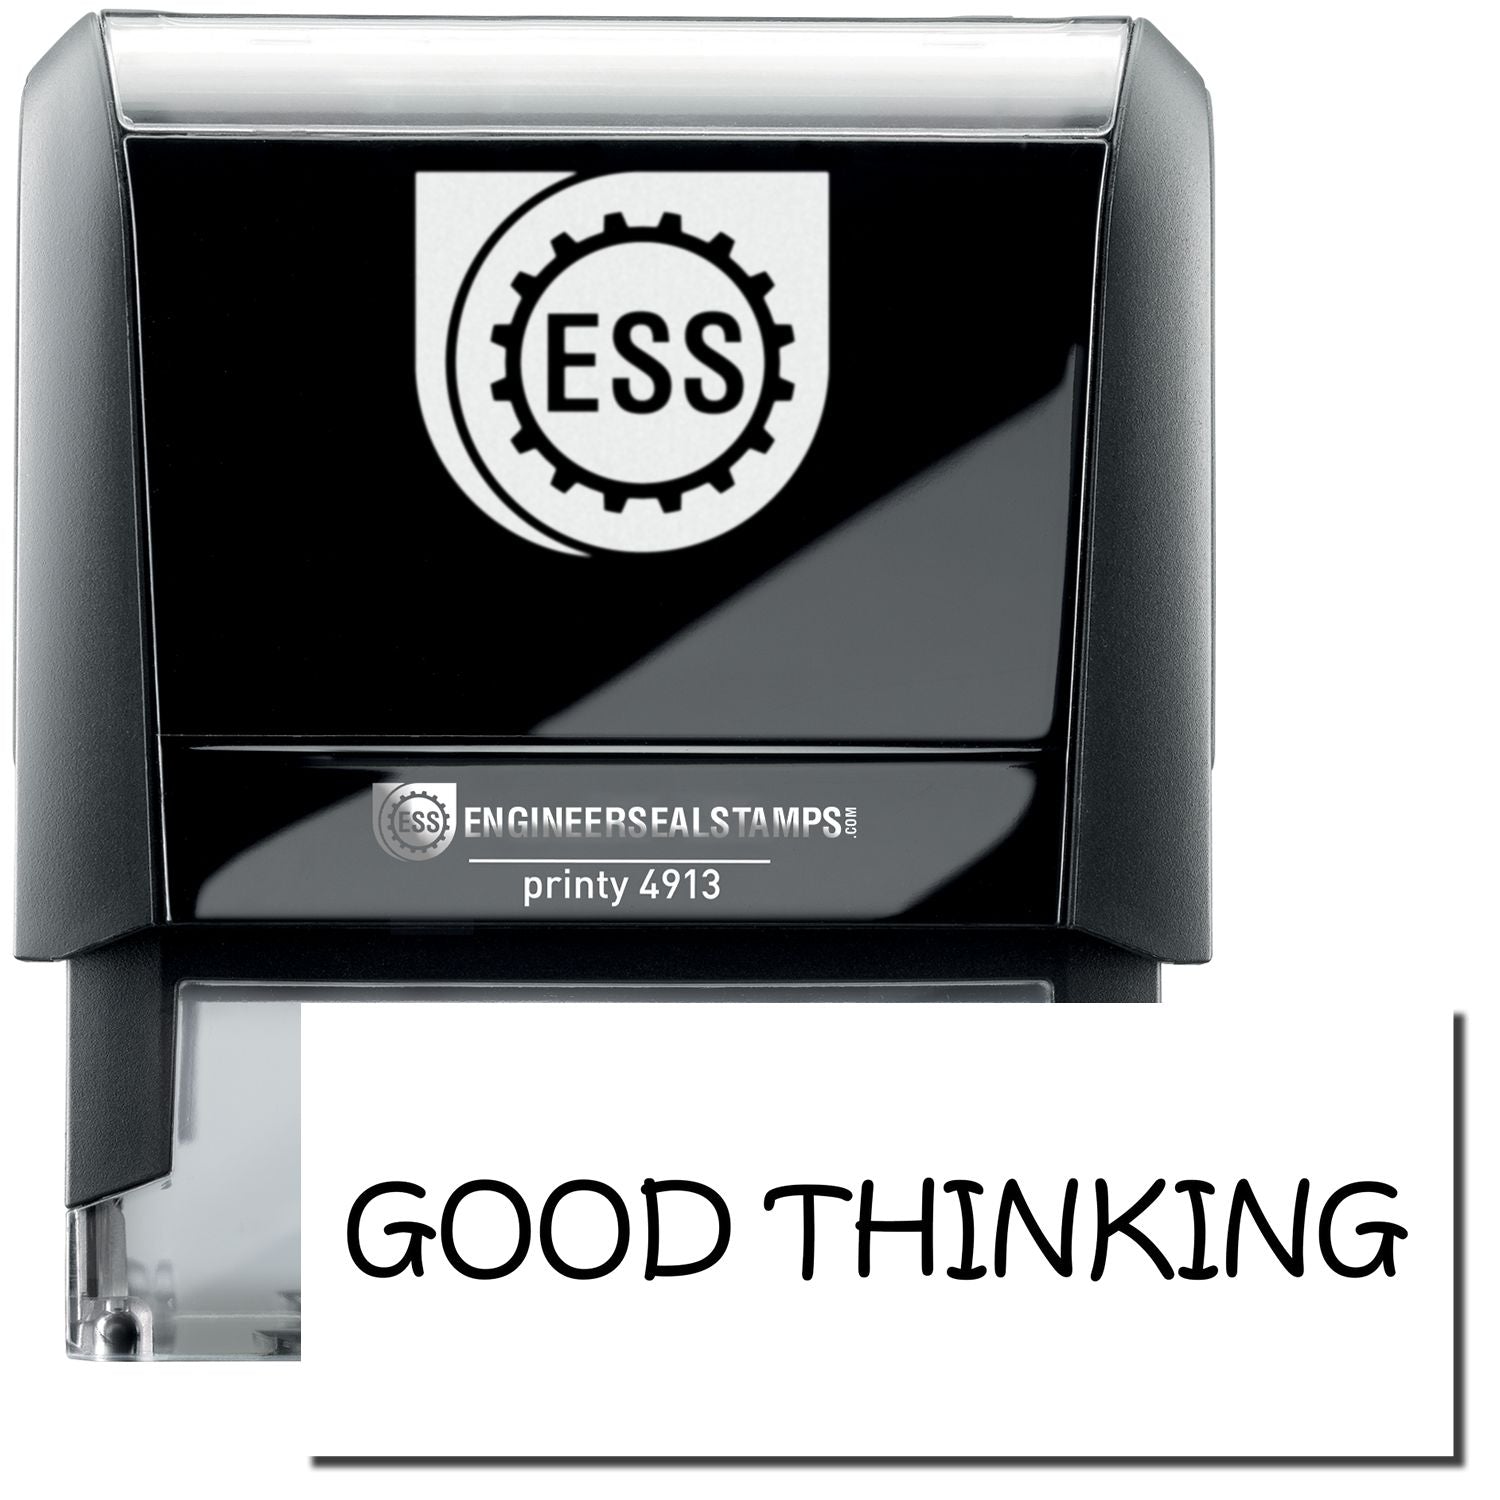 A self-inking stamp with a stamped image showing how the text "GOOD THINKING" in a unique large font is displayed by it.